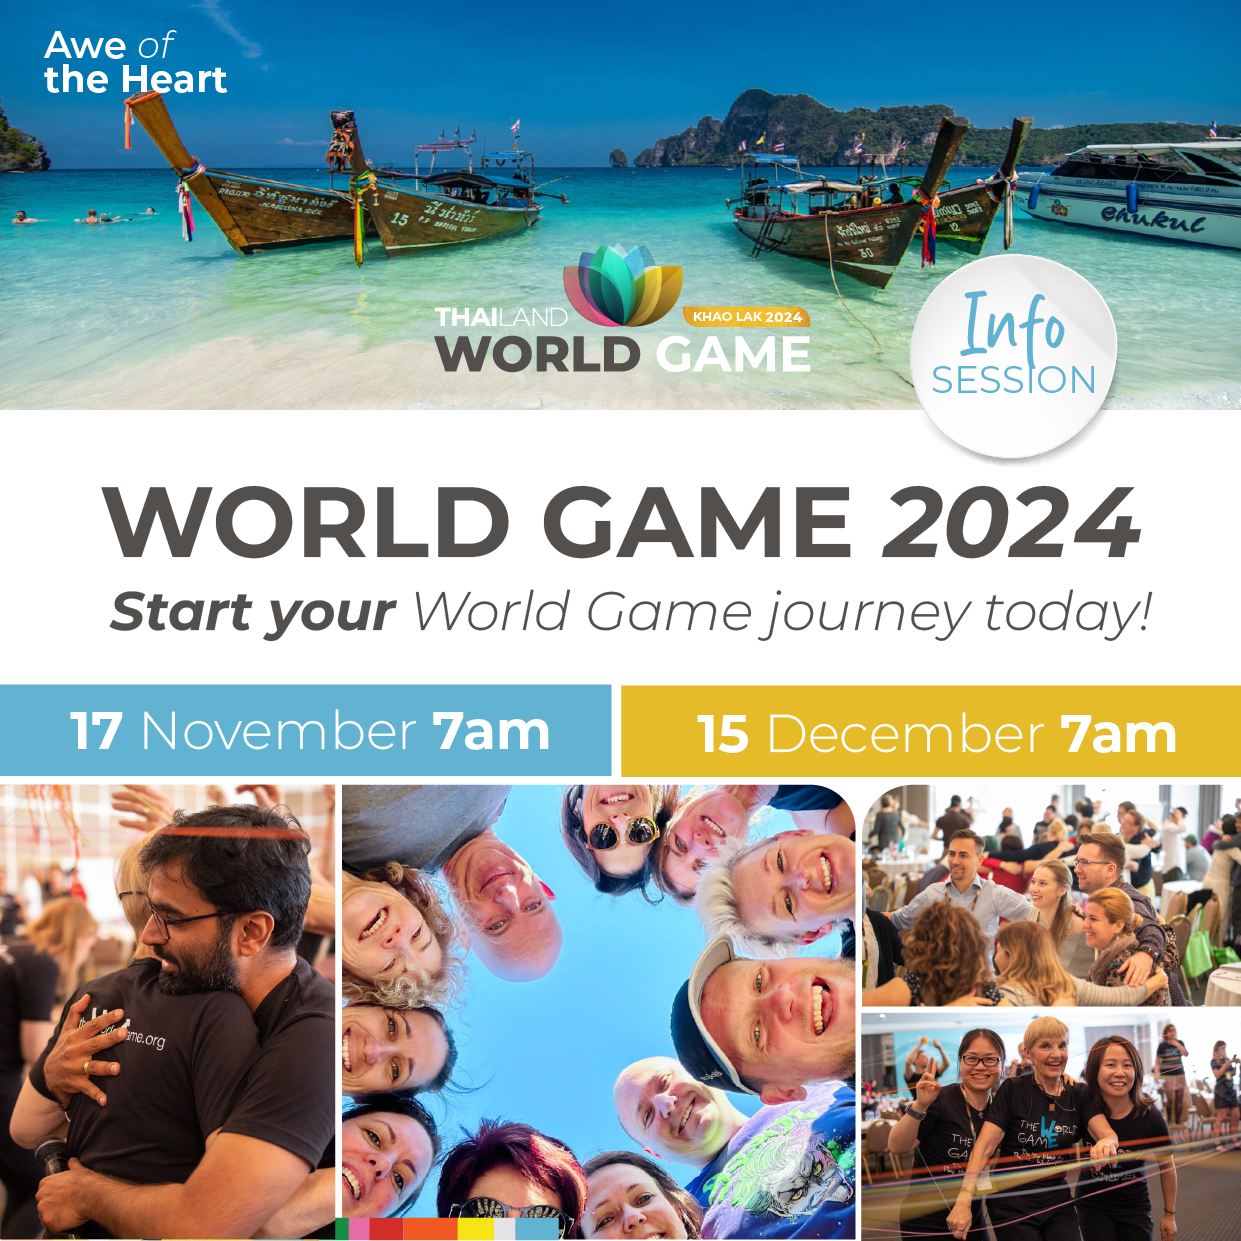 World game information session 17 November and 15 December. Join us and find out more about the world game 2024